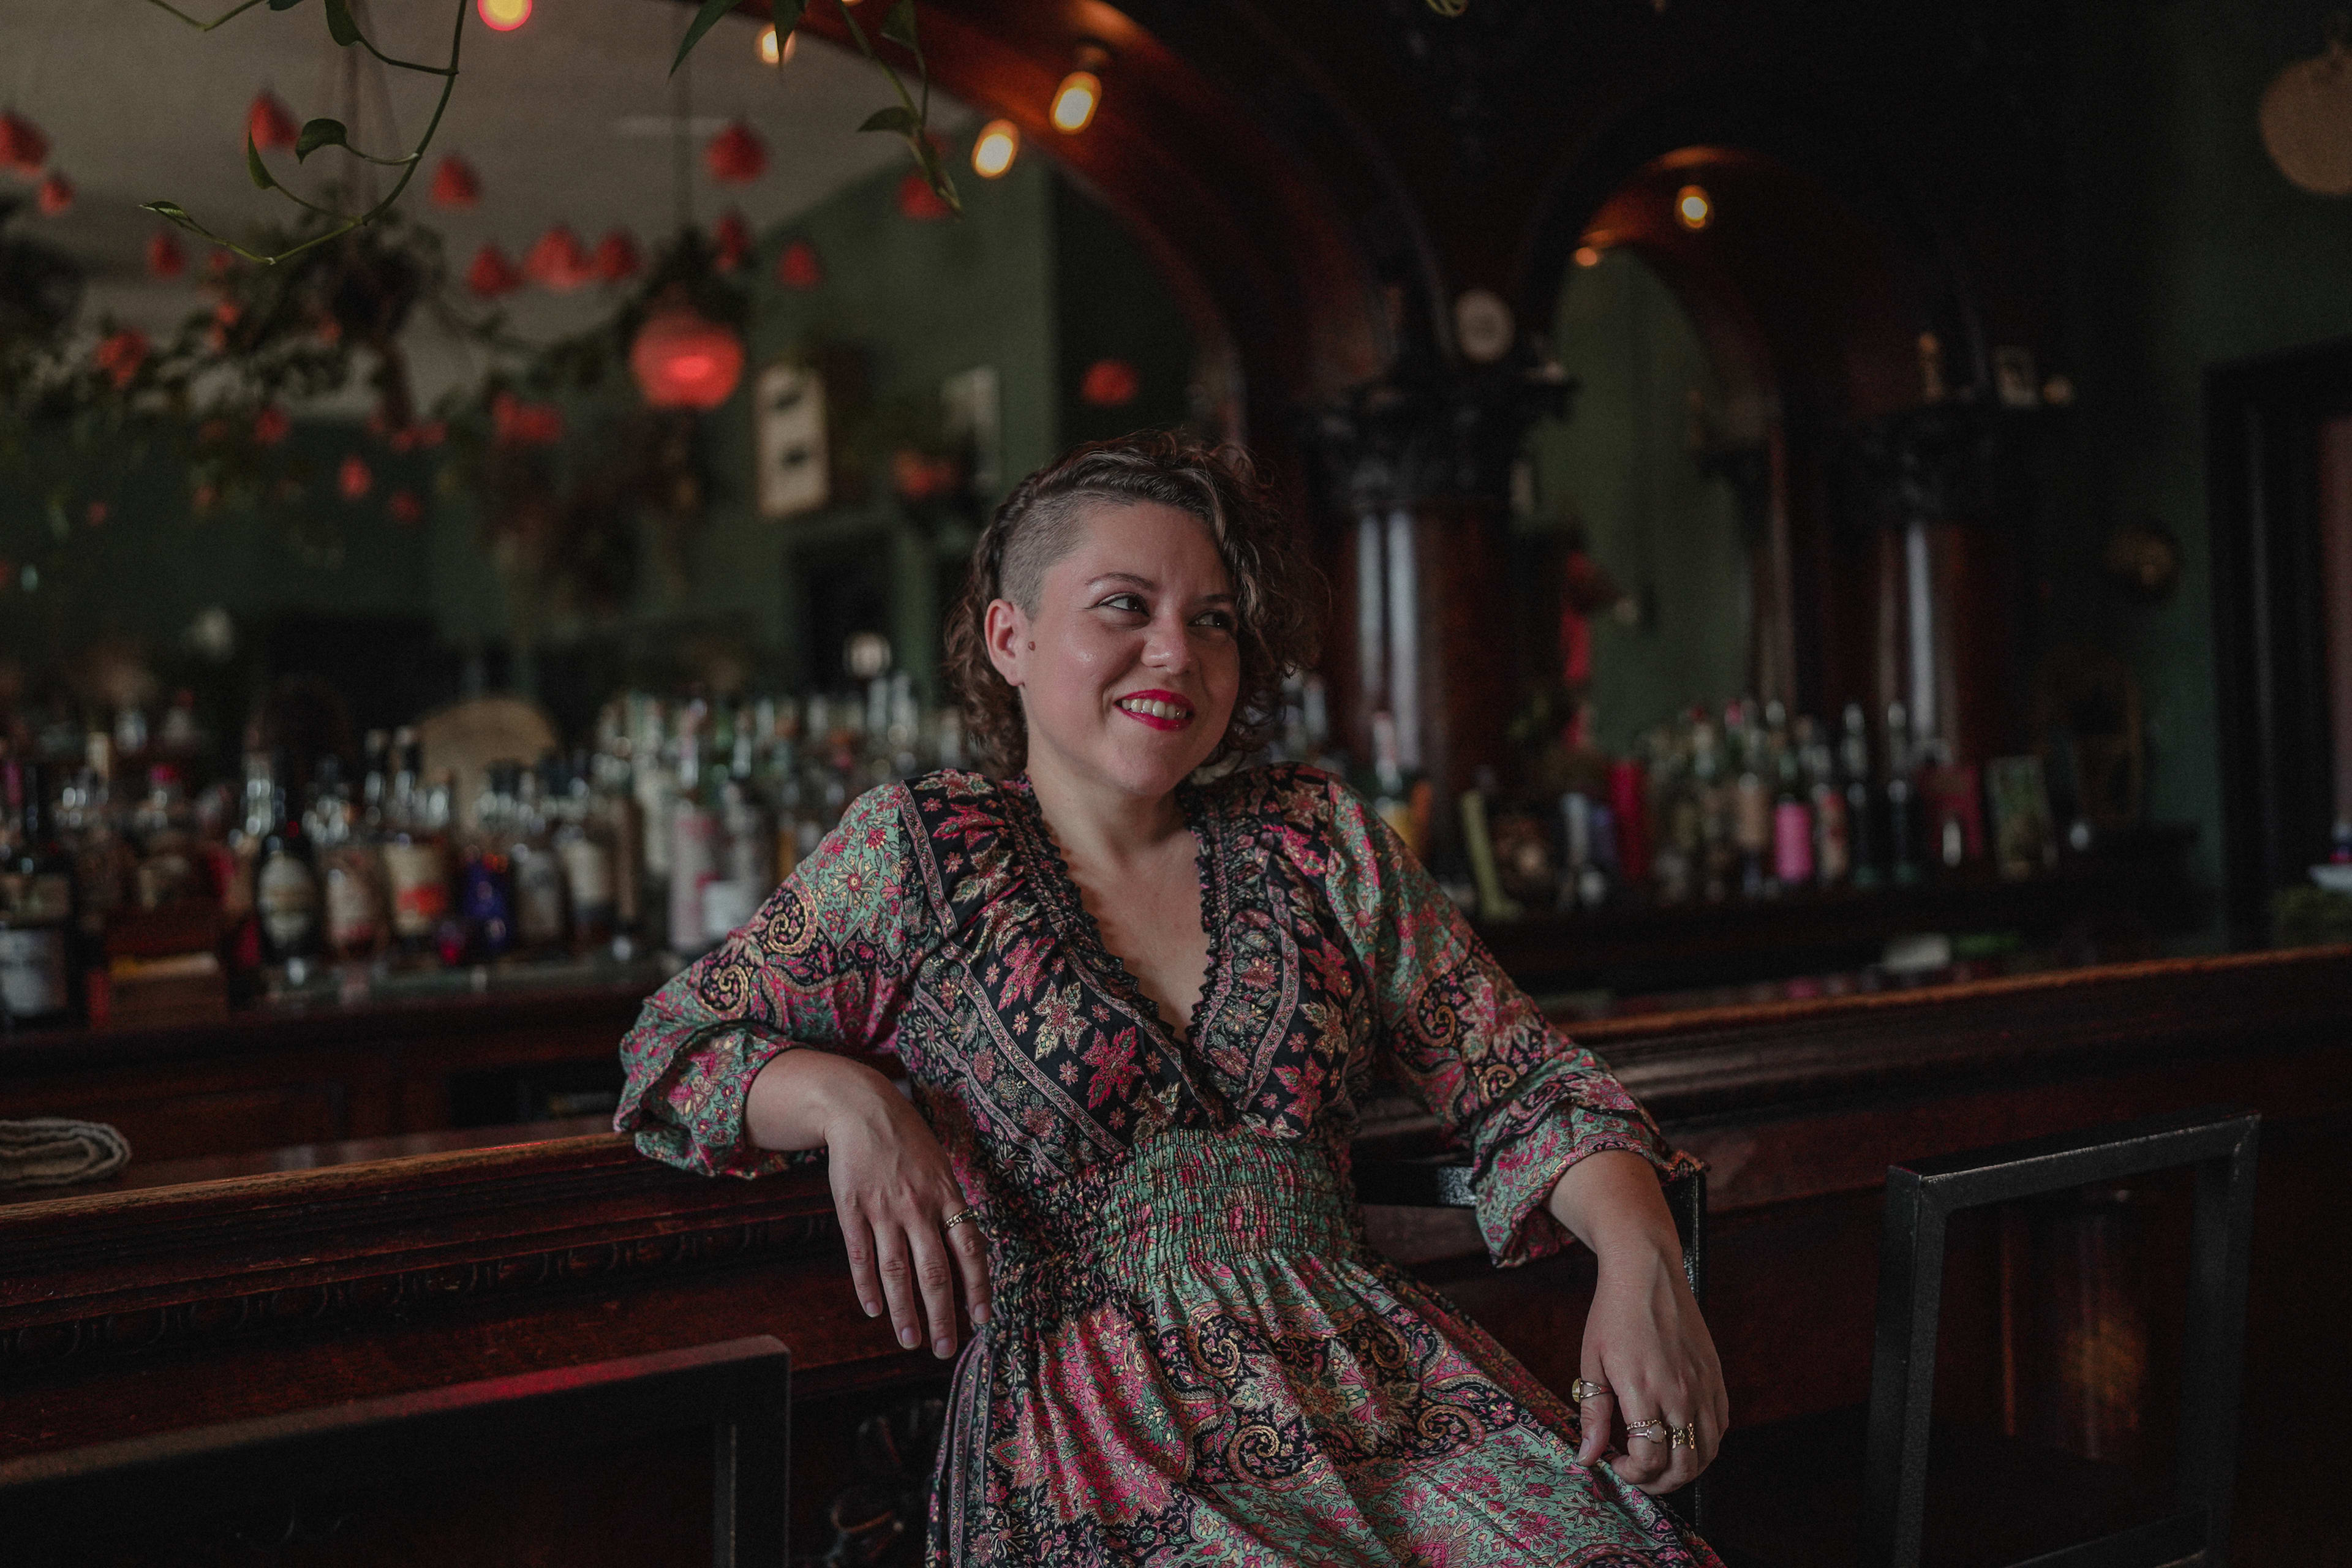 A portrait of a woman sitting at a bar with a lot of bottles behind her.